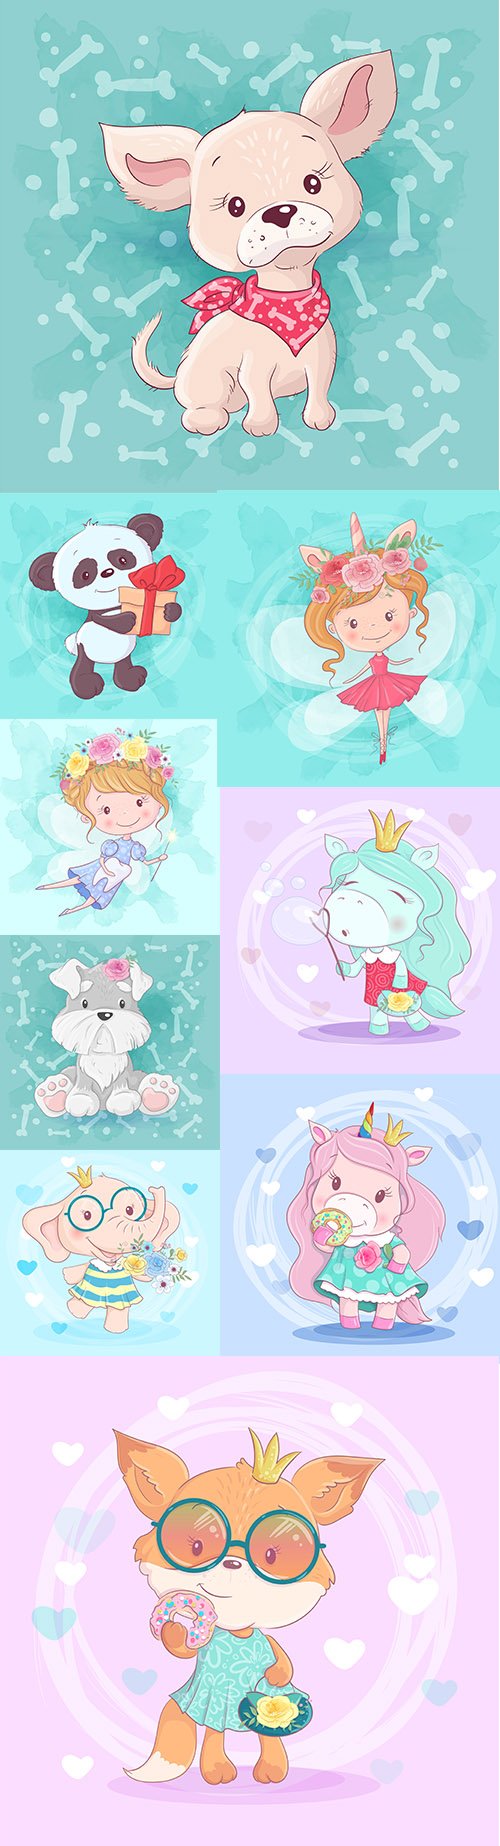 Cartoons Hand-Drawing Little Girl and Animals Illustrations Vector Set